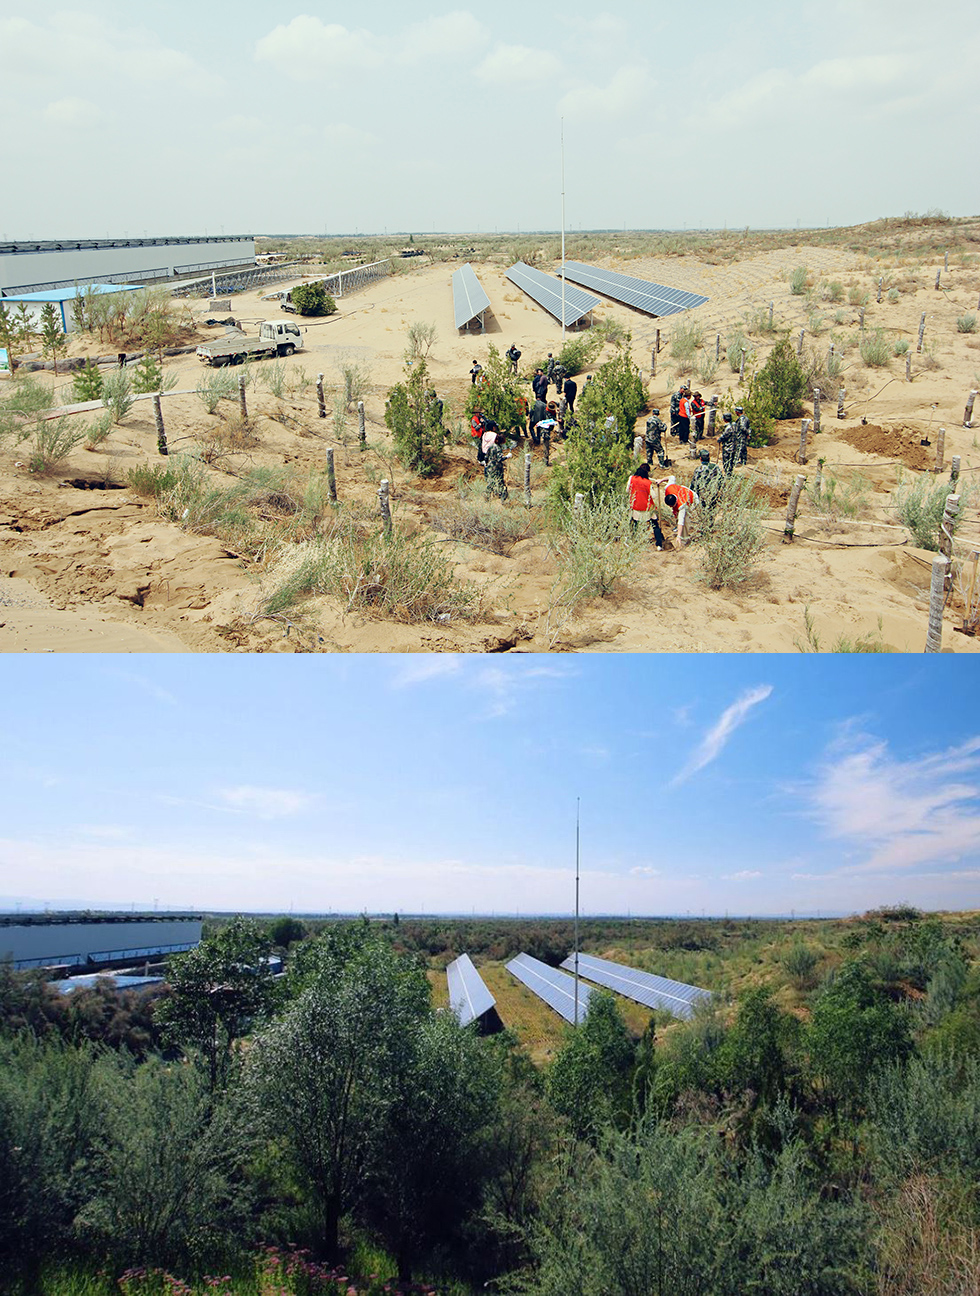 Hanwha Solar Forest participants plant trees in a barren field, creating a small forest that surrounds three lines of solar panels